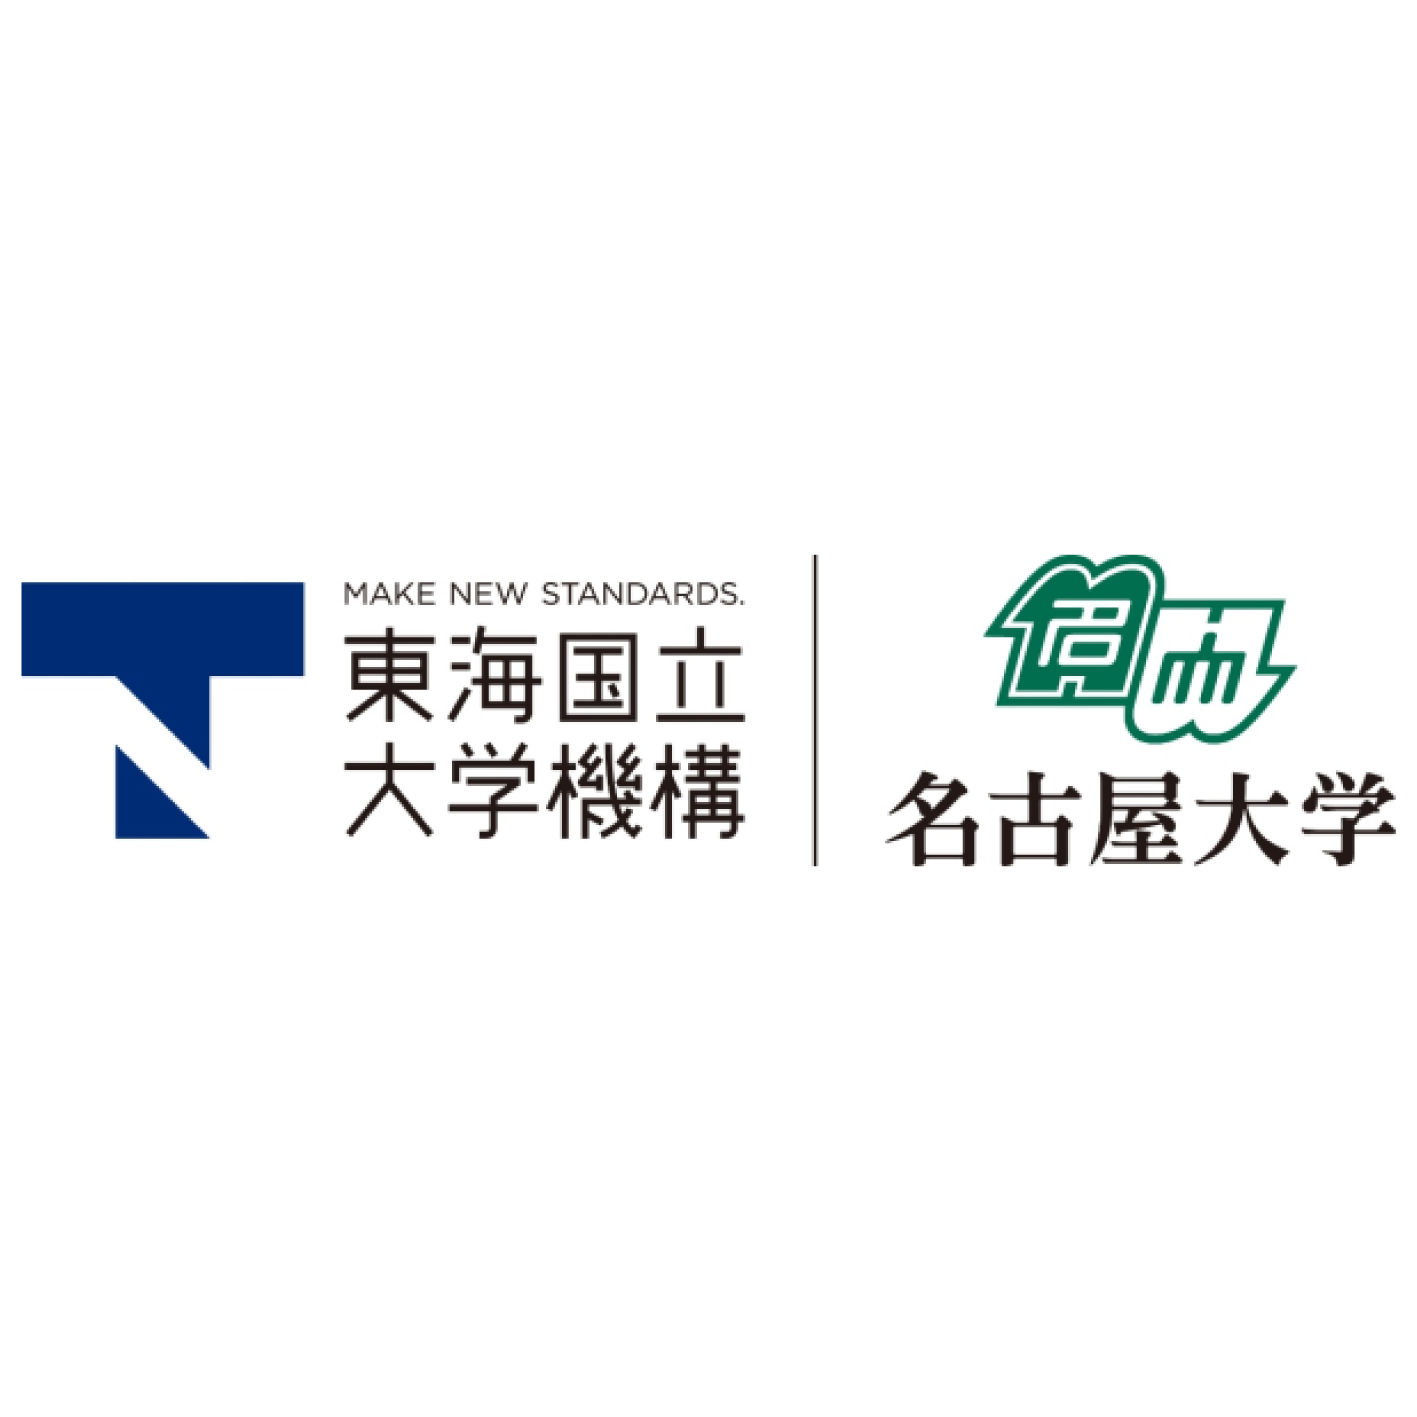 Tokai National Higher Education and Research System Nagoya University